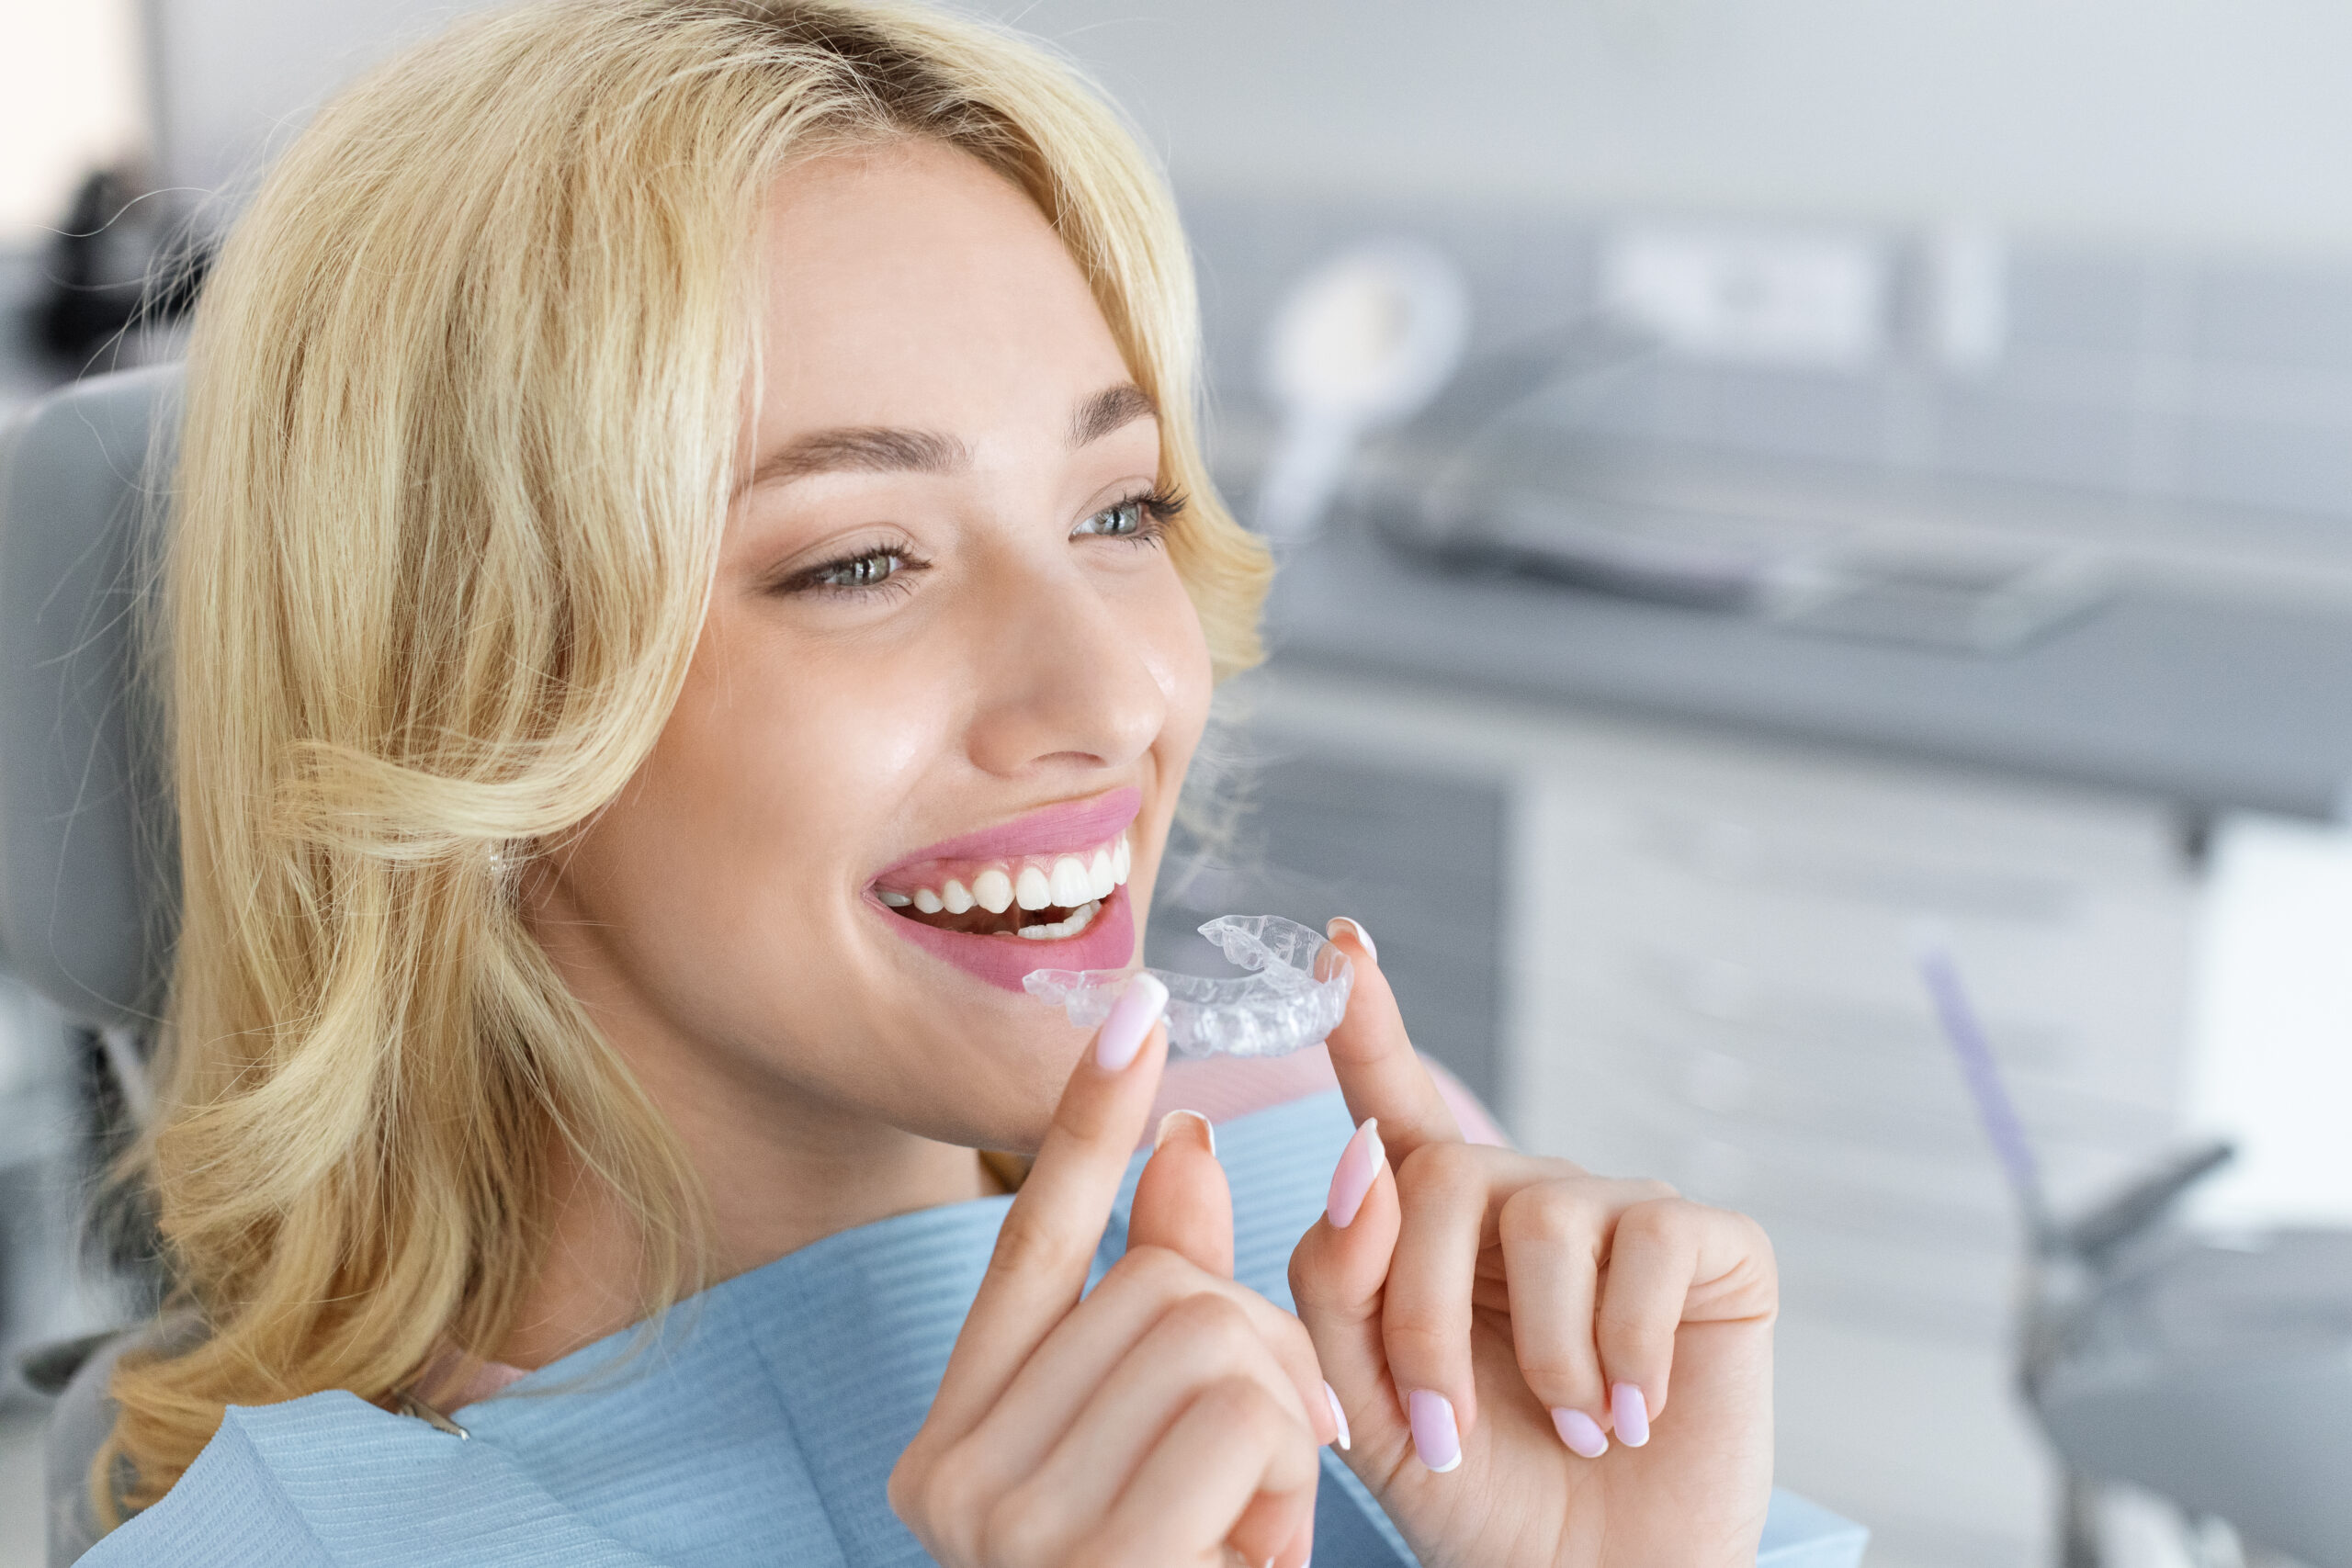 5 Invisalign Tips and Tricks for Your First Week of Treatment